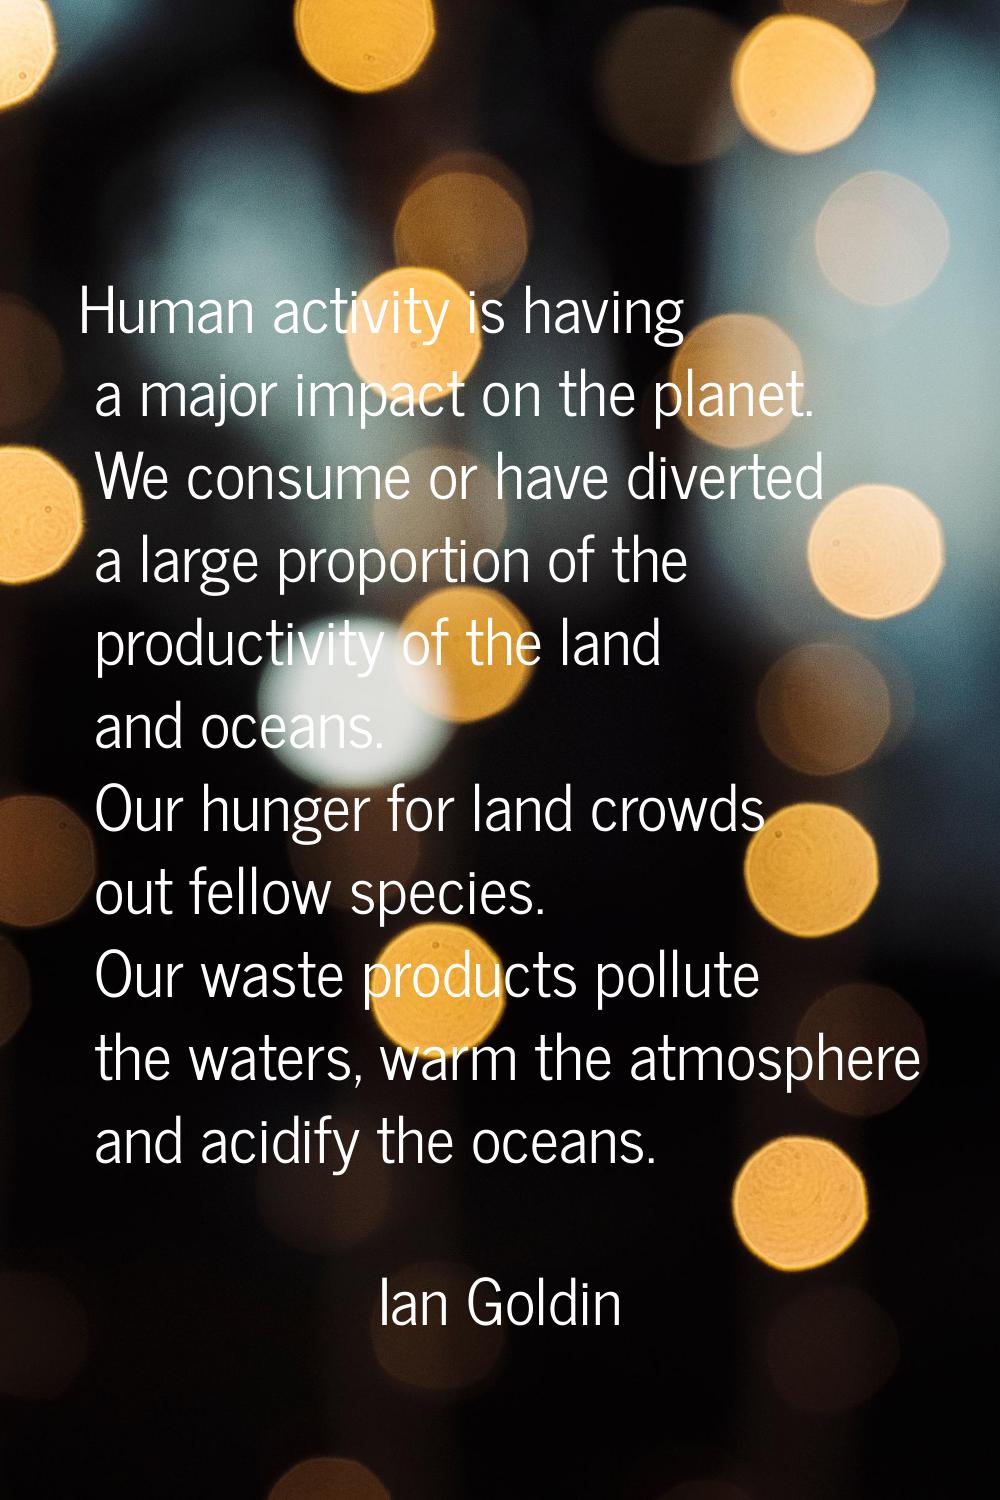 Human activity is having a major impact on the planet. We consume or have diverted a large proporti